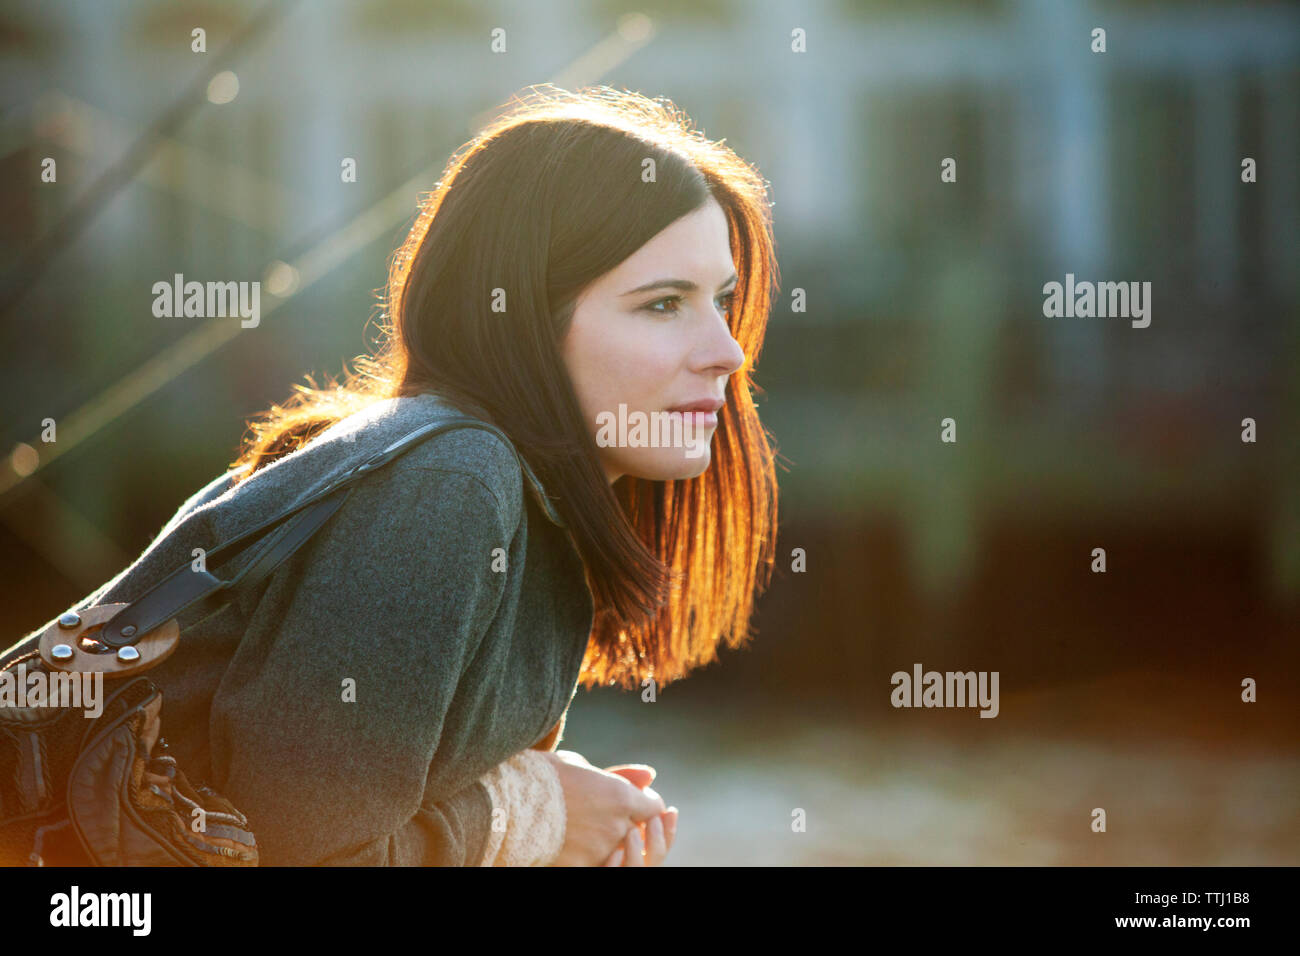 Side view of woman leaning while looking away Stock Photo